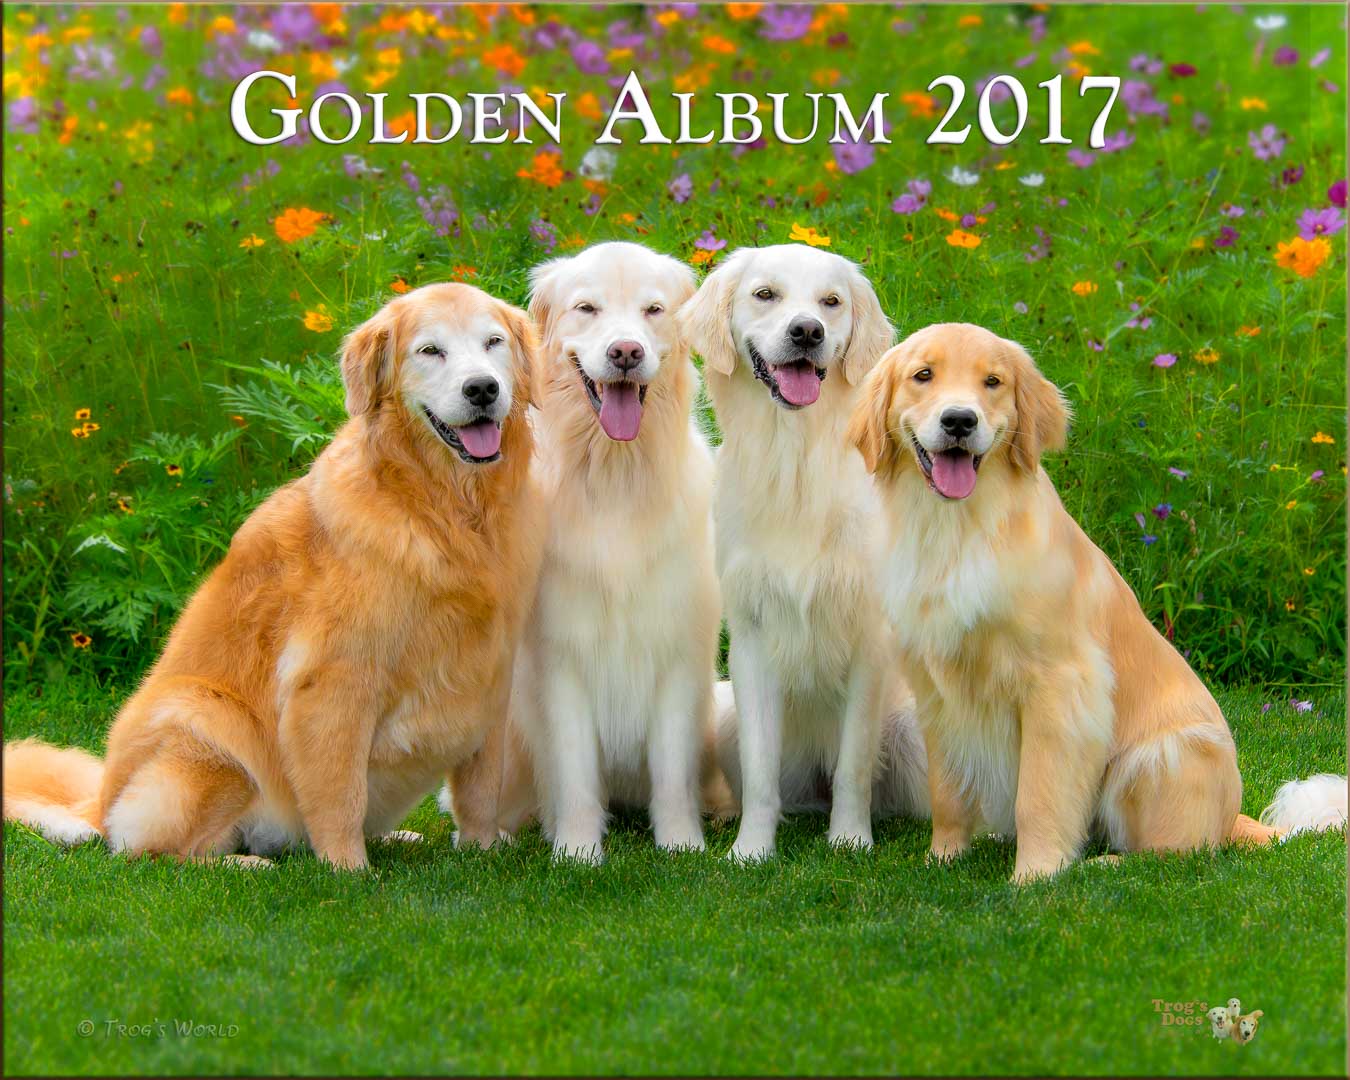 Four Golden Retrievers smiling on a summer day